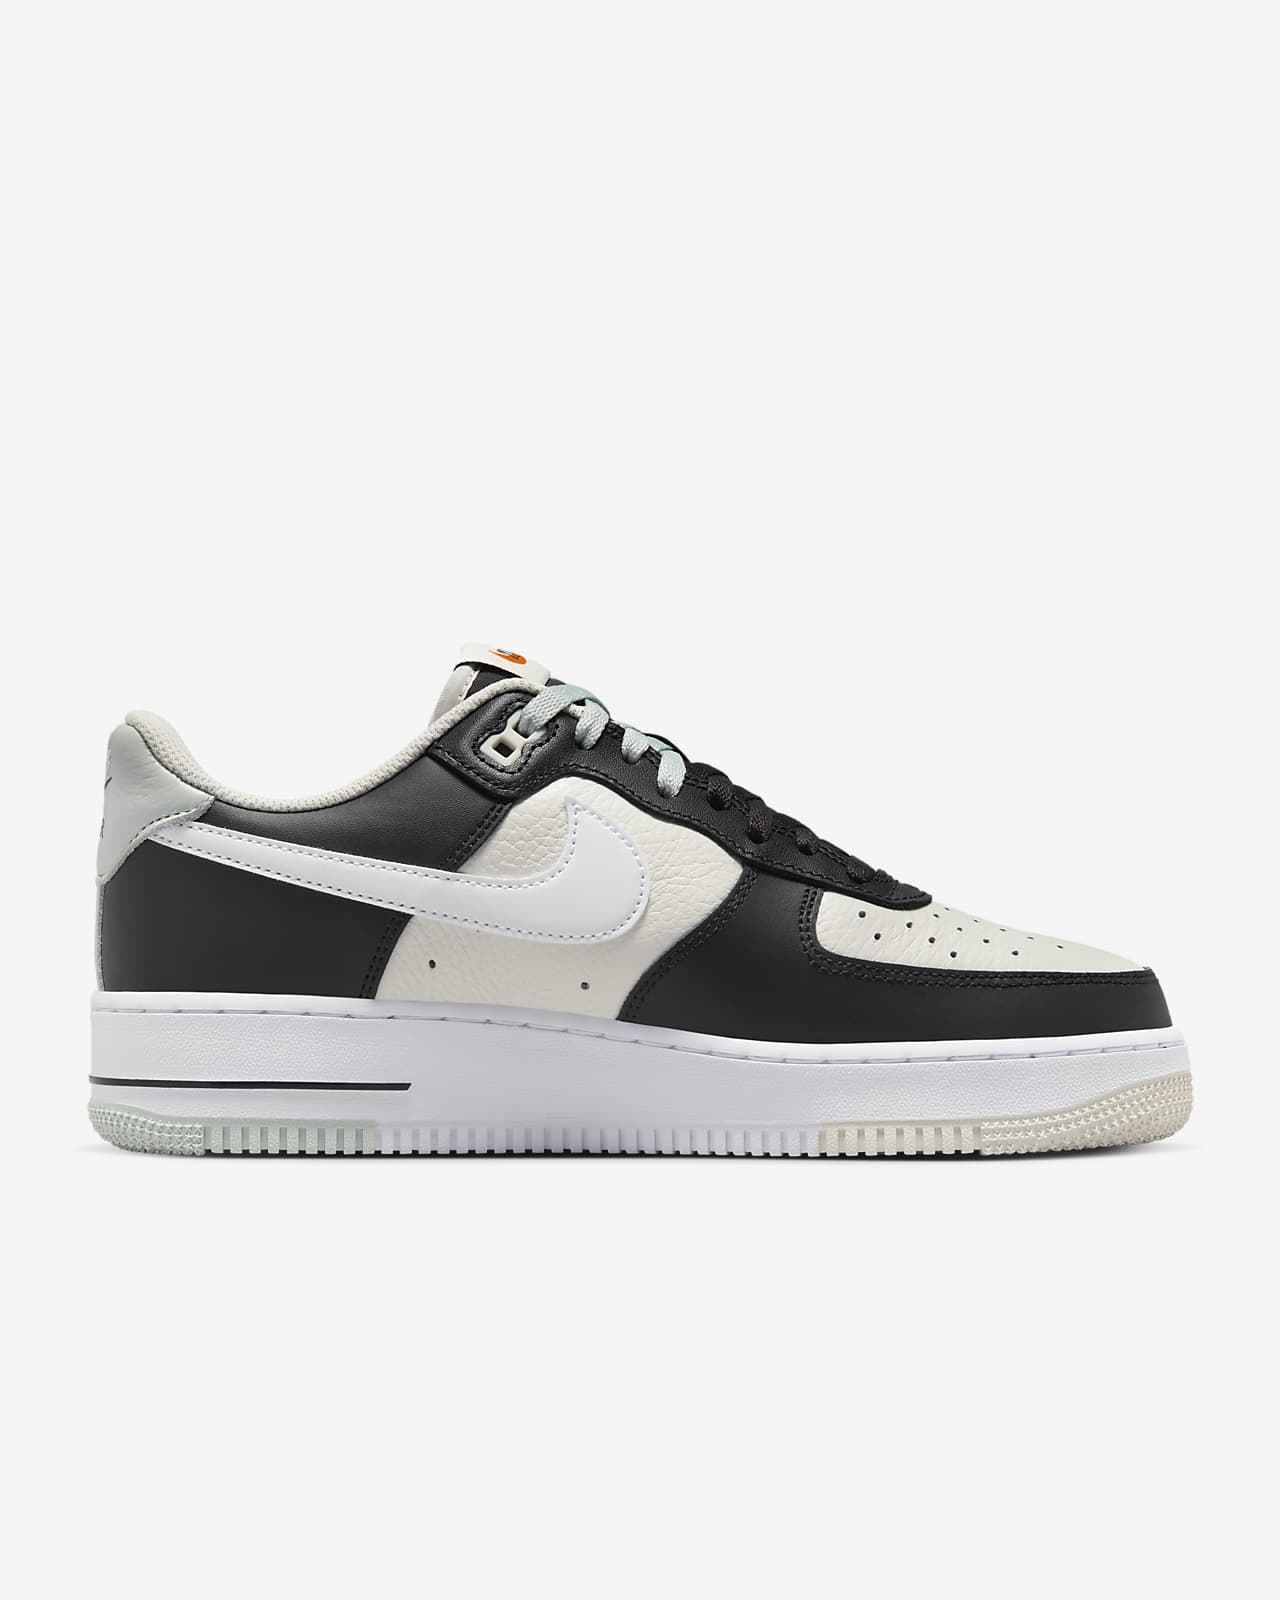 Nike Men's Air Force 1 '07 LV8 Shoes in Black, Size: 8 | FD2592-002